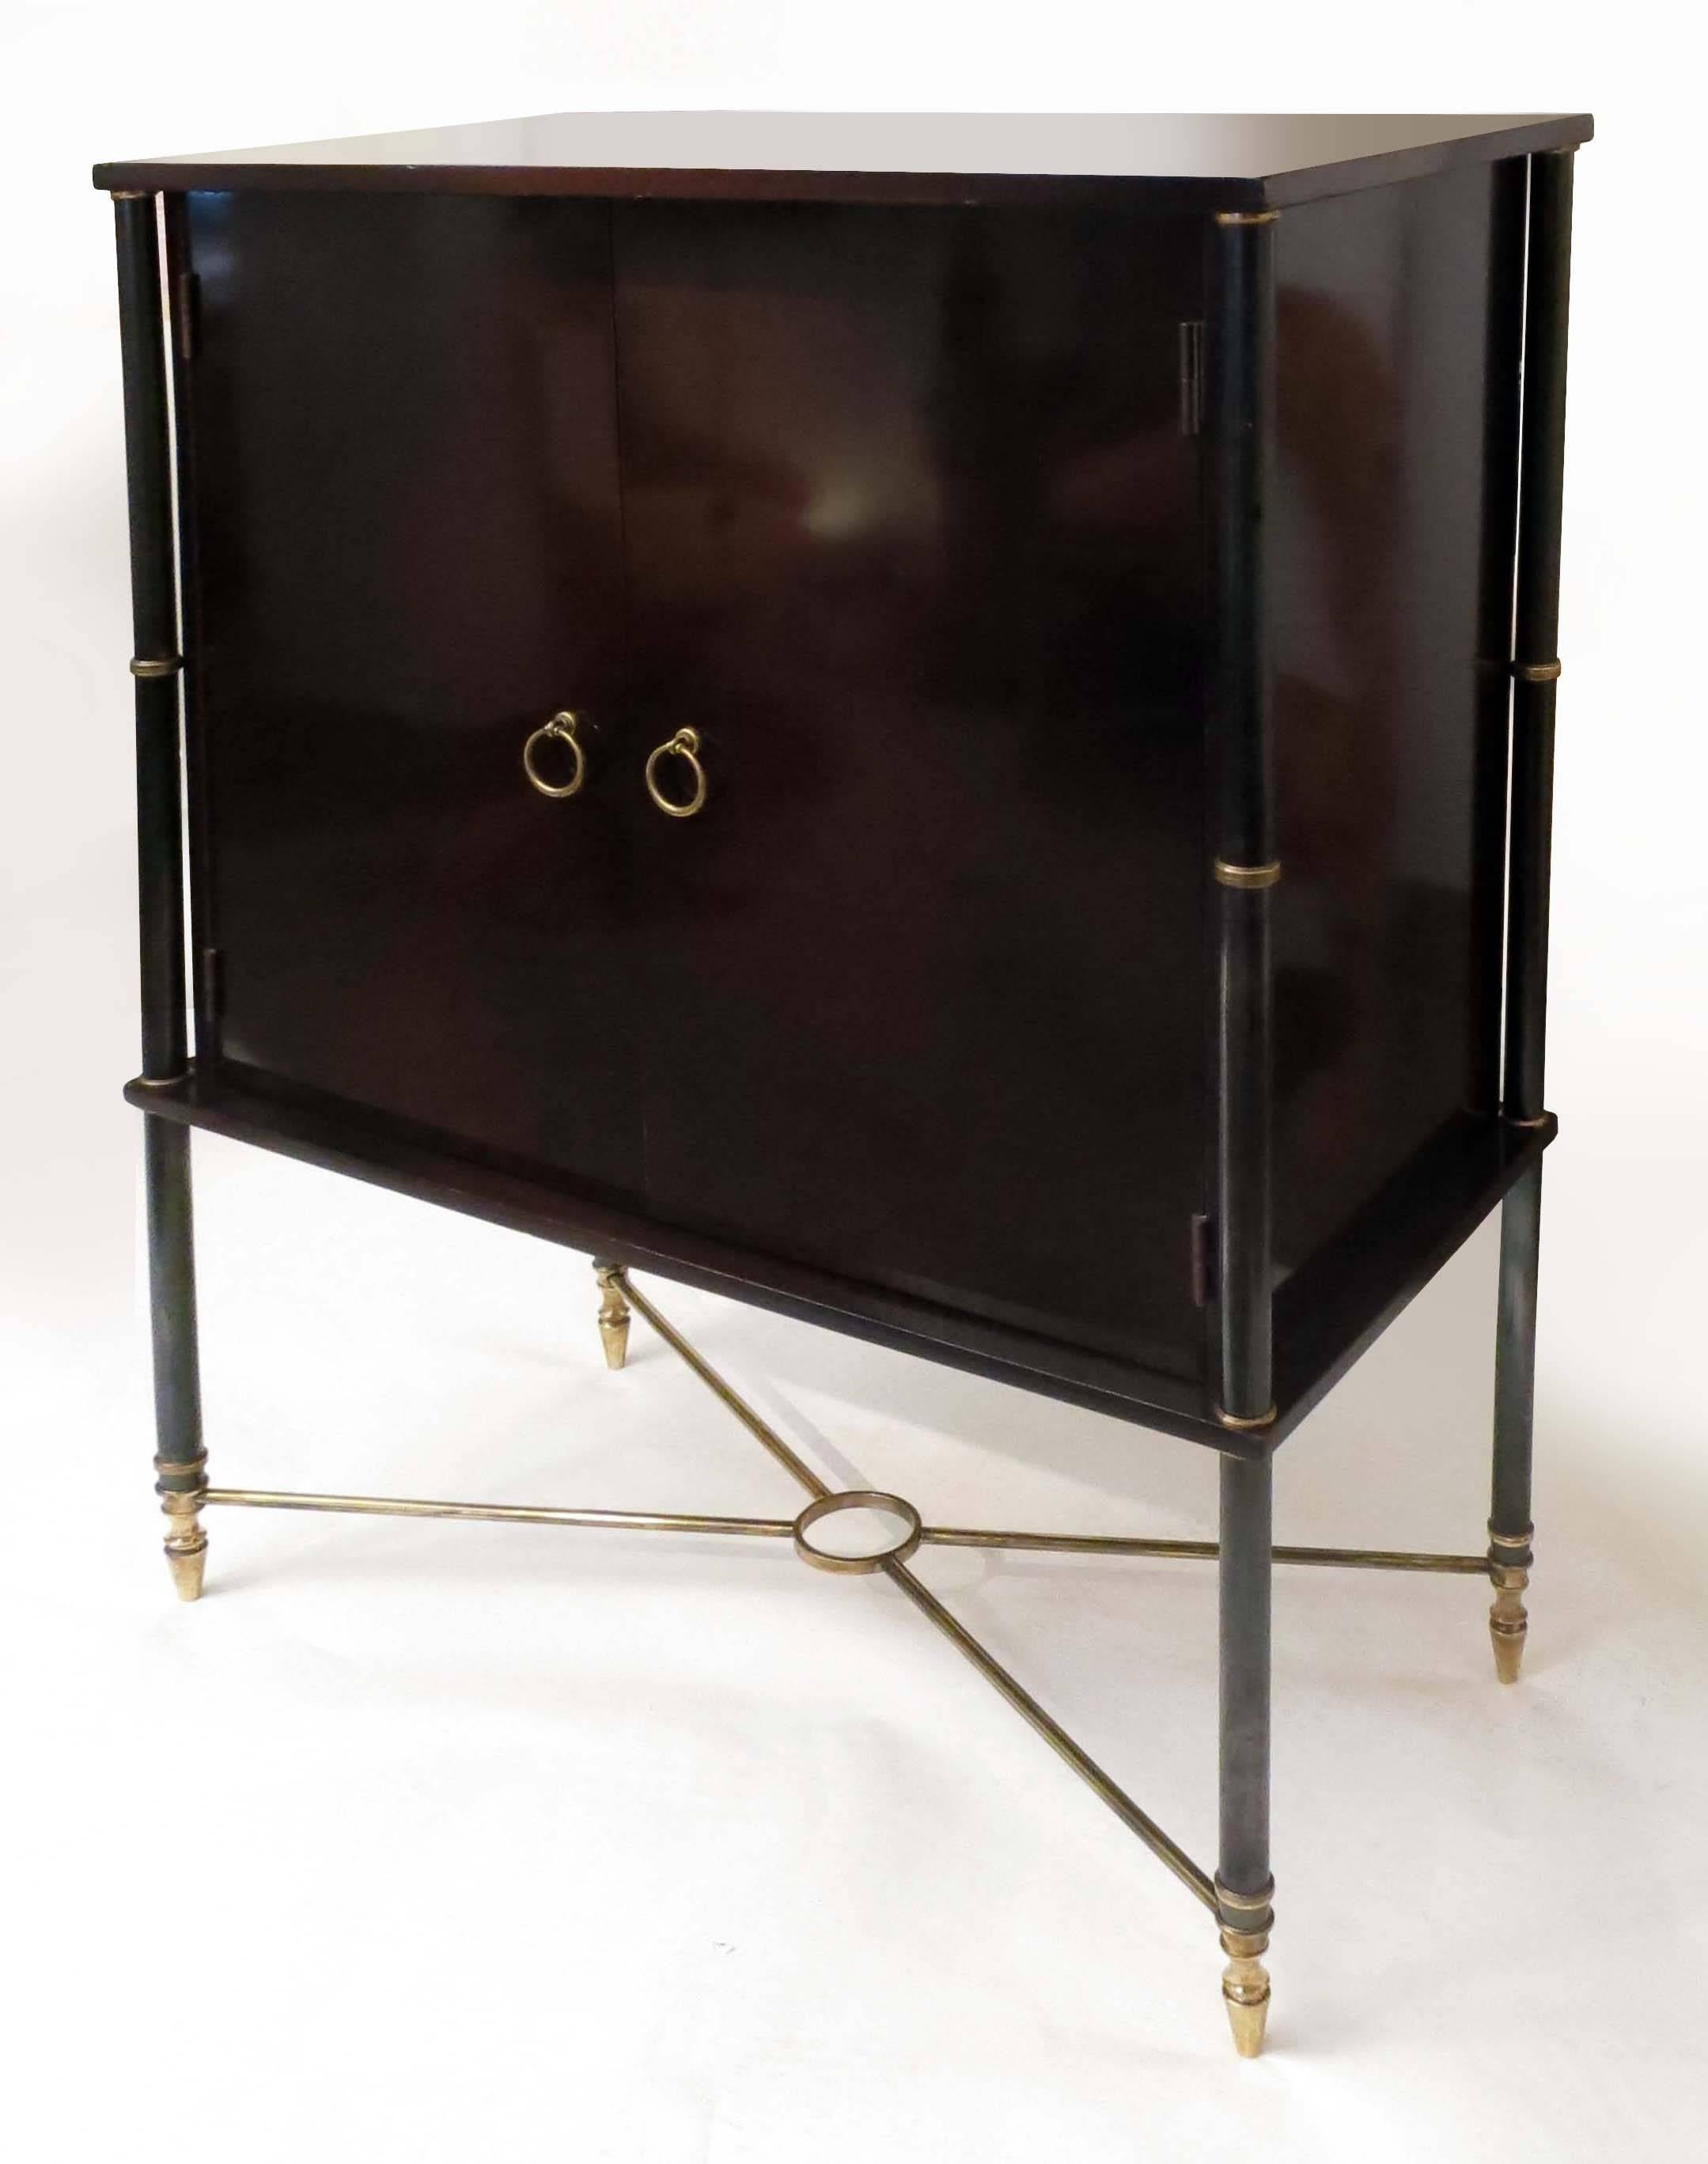 Elegant cabinet in eggplant color lacquered wood with gunmetal and brass columns at four angles.
Inside in mahogany.